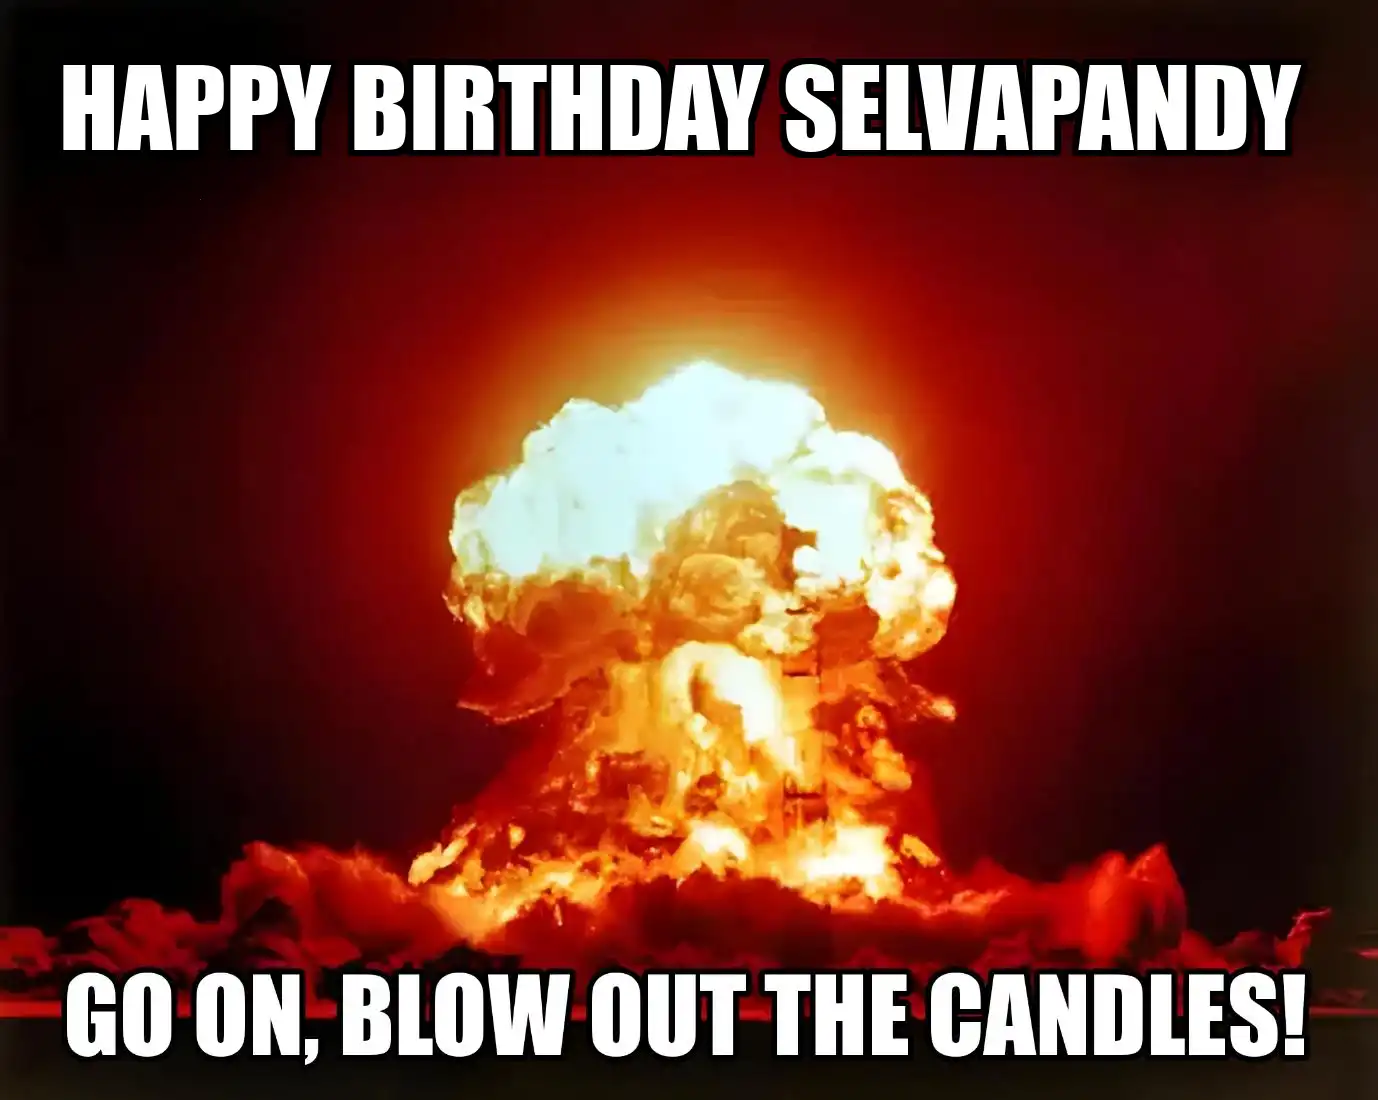 Happy Birthday Selvapandy Go On Blow Out The Candles Meme